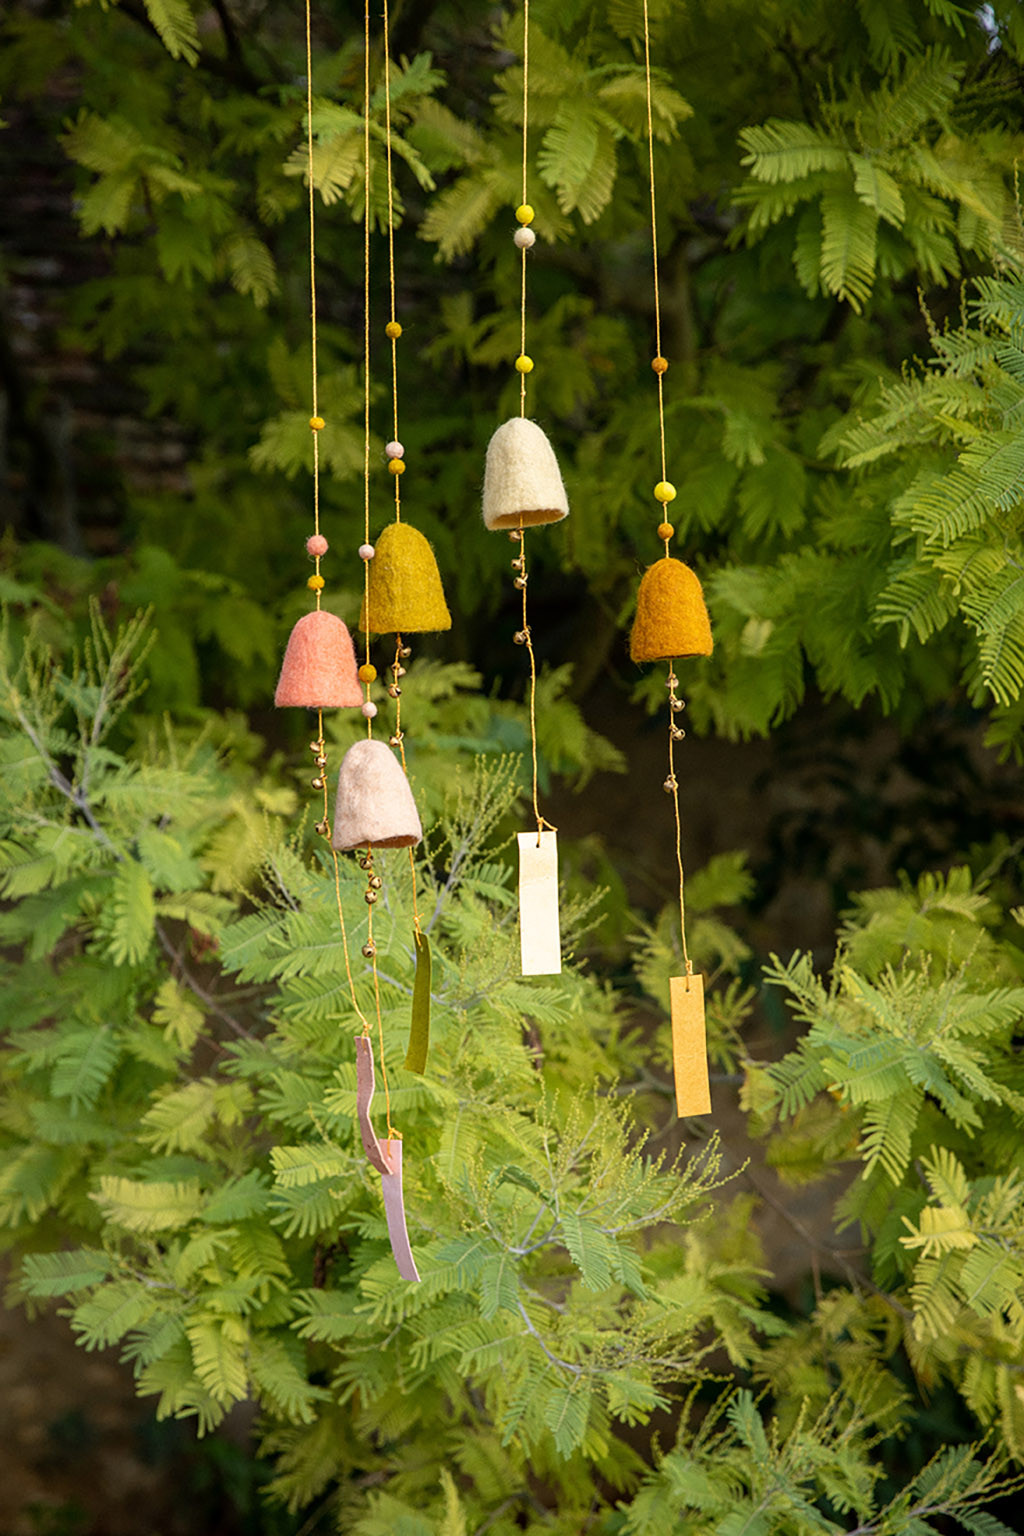 Felt bells made in Nepal bring a touch of colorful and poetic decoration